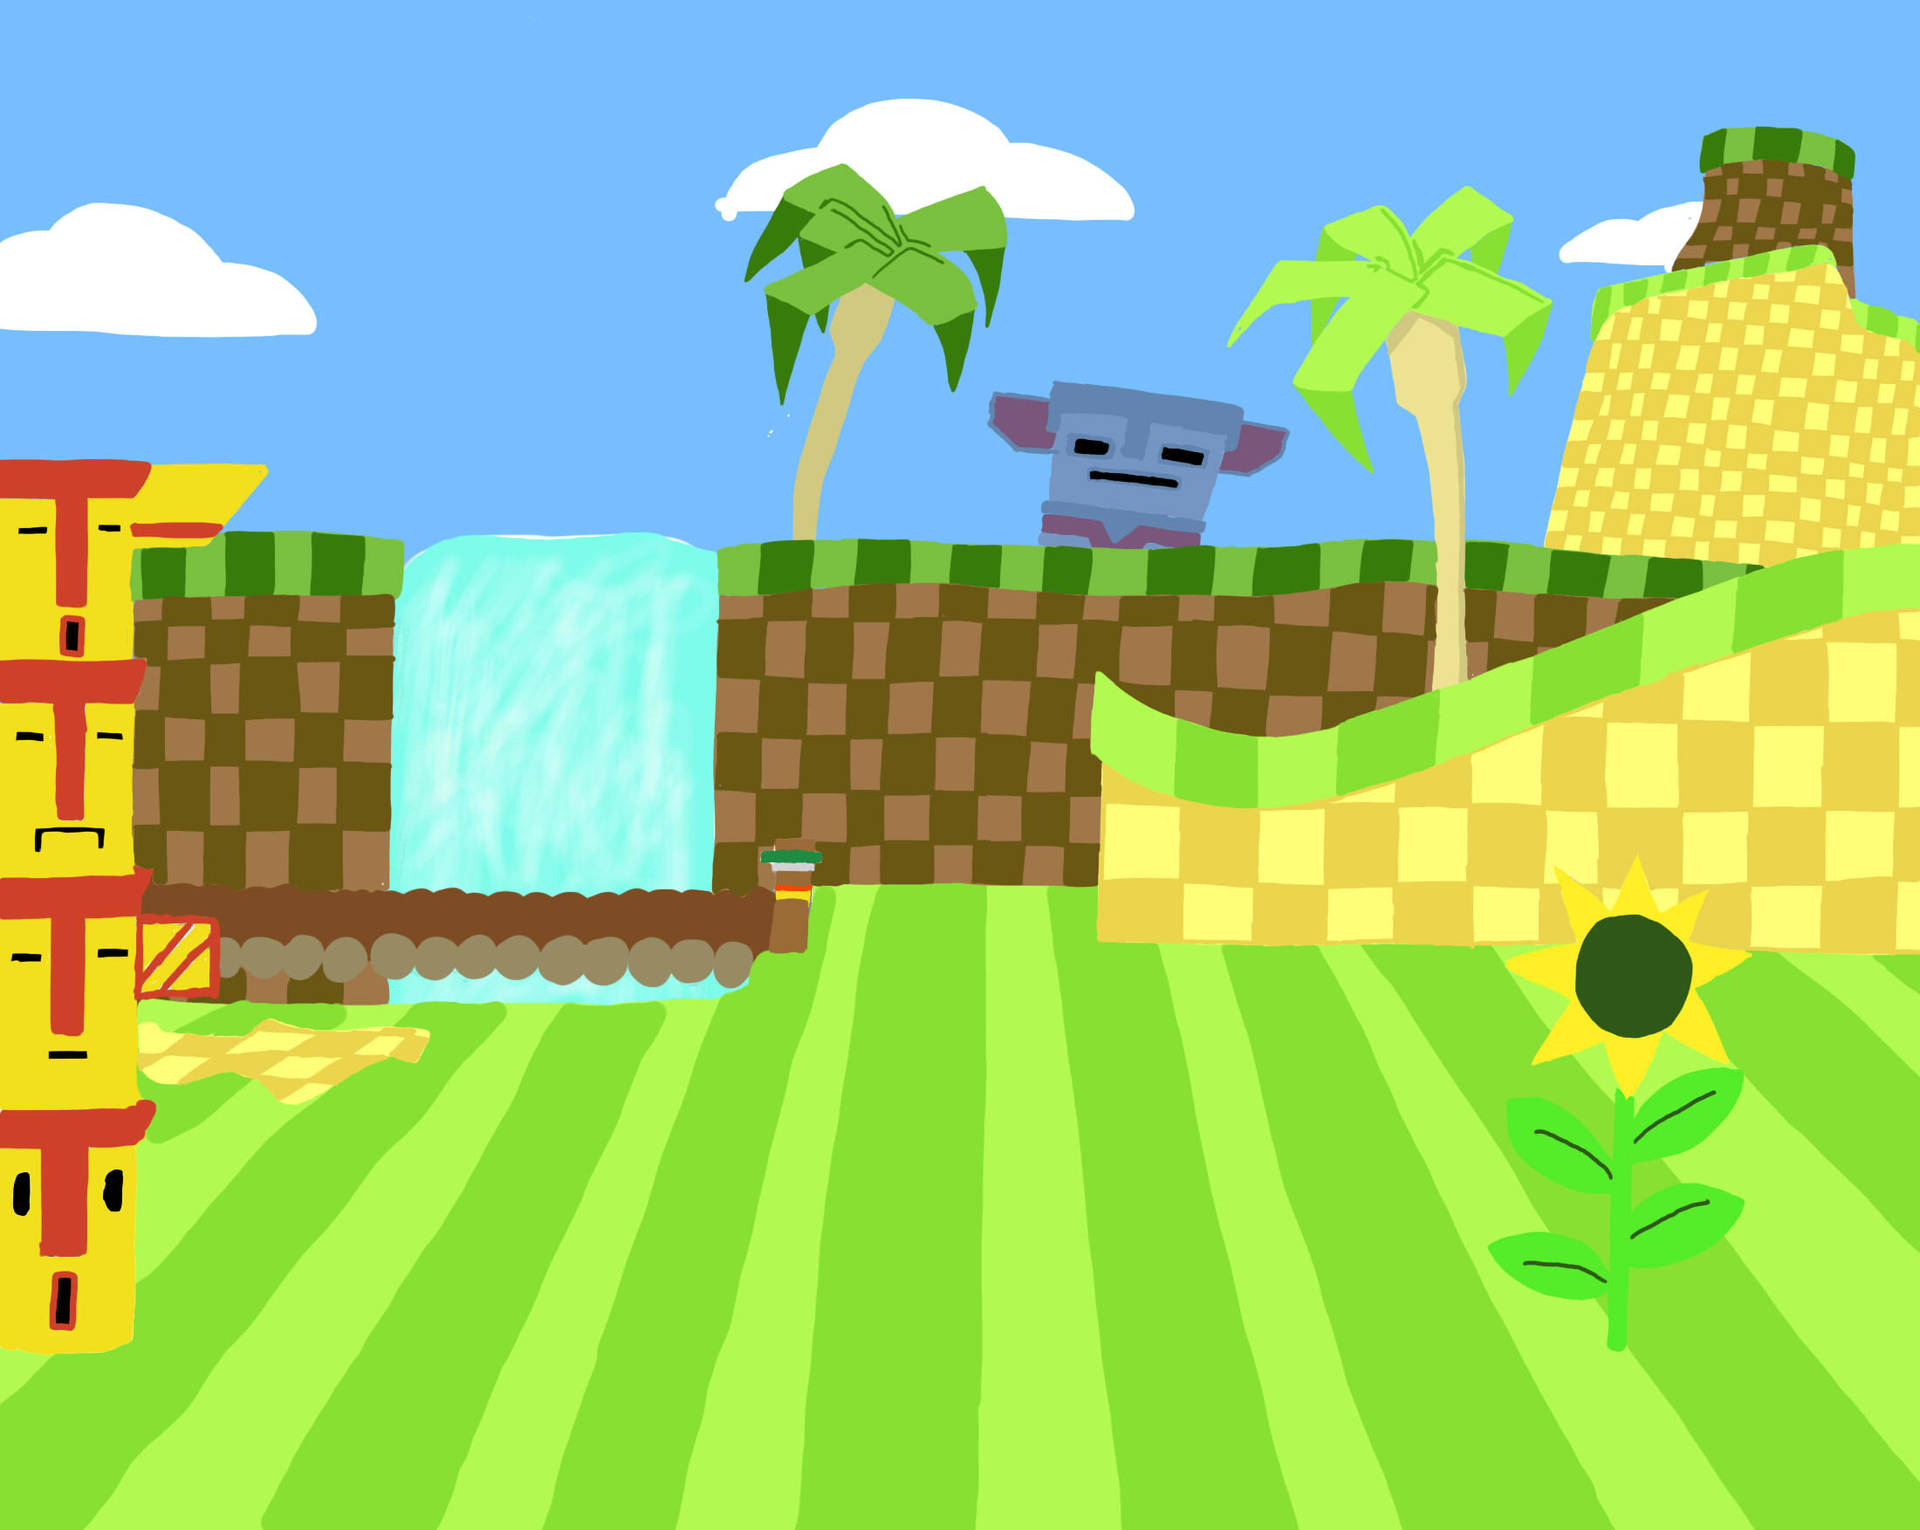 Enjoying a perfect summer day in Green Hill Zone Wallpaper